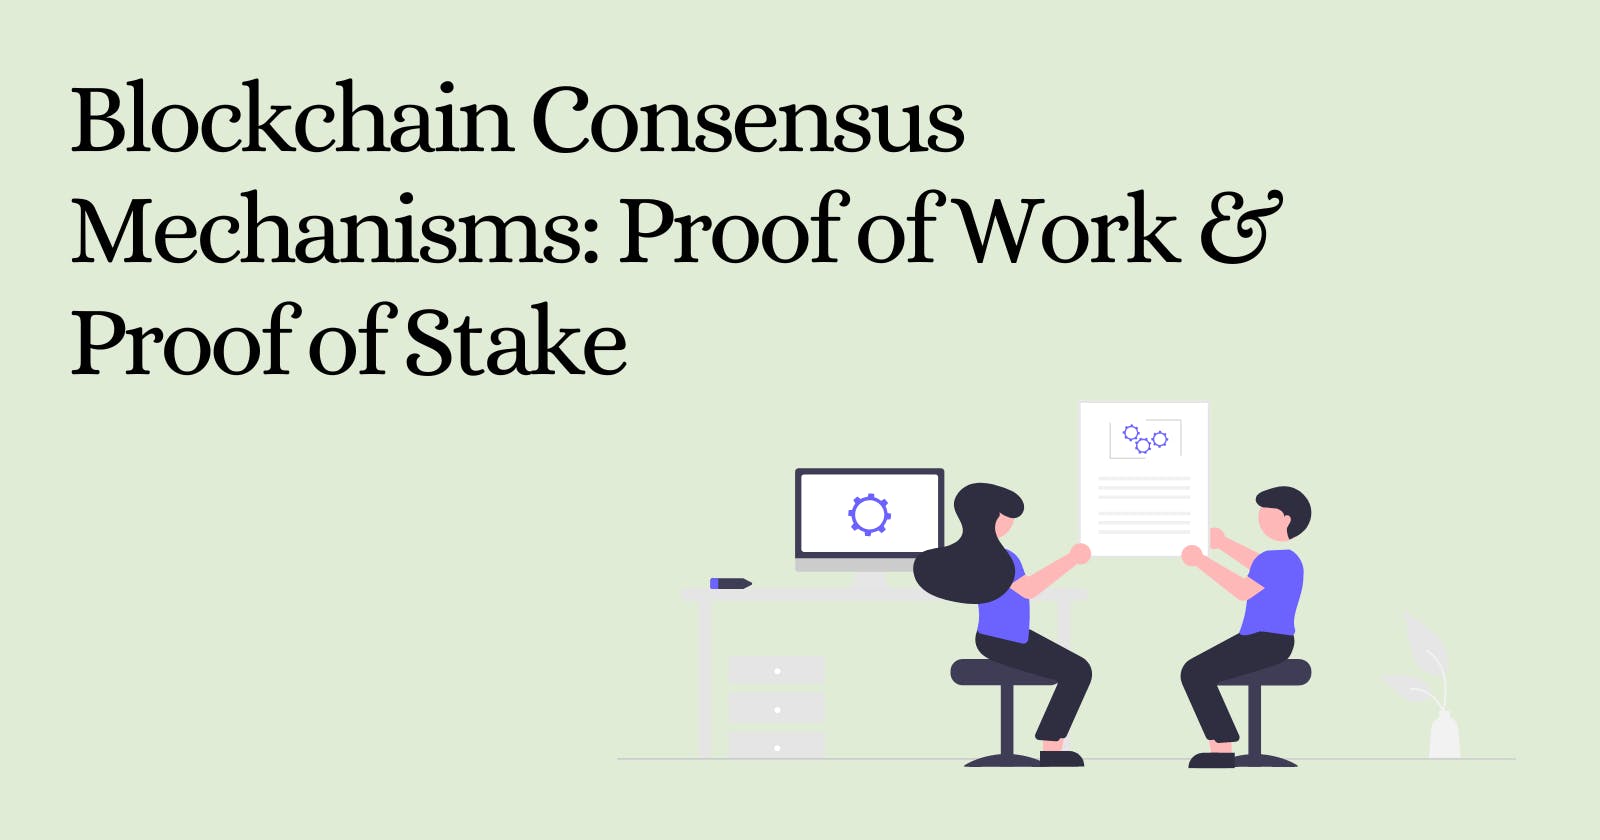 Blockchain Consensus Mechanisms: 
Proof of Work & Proof of Stake